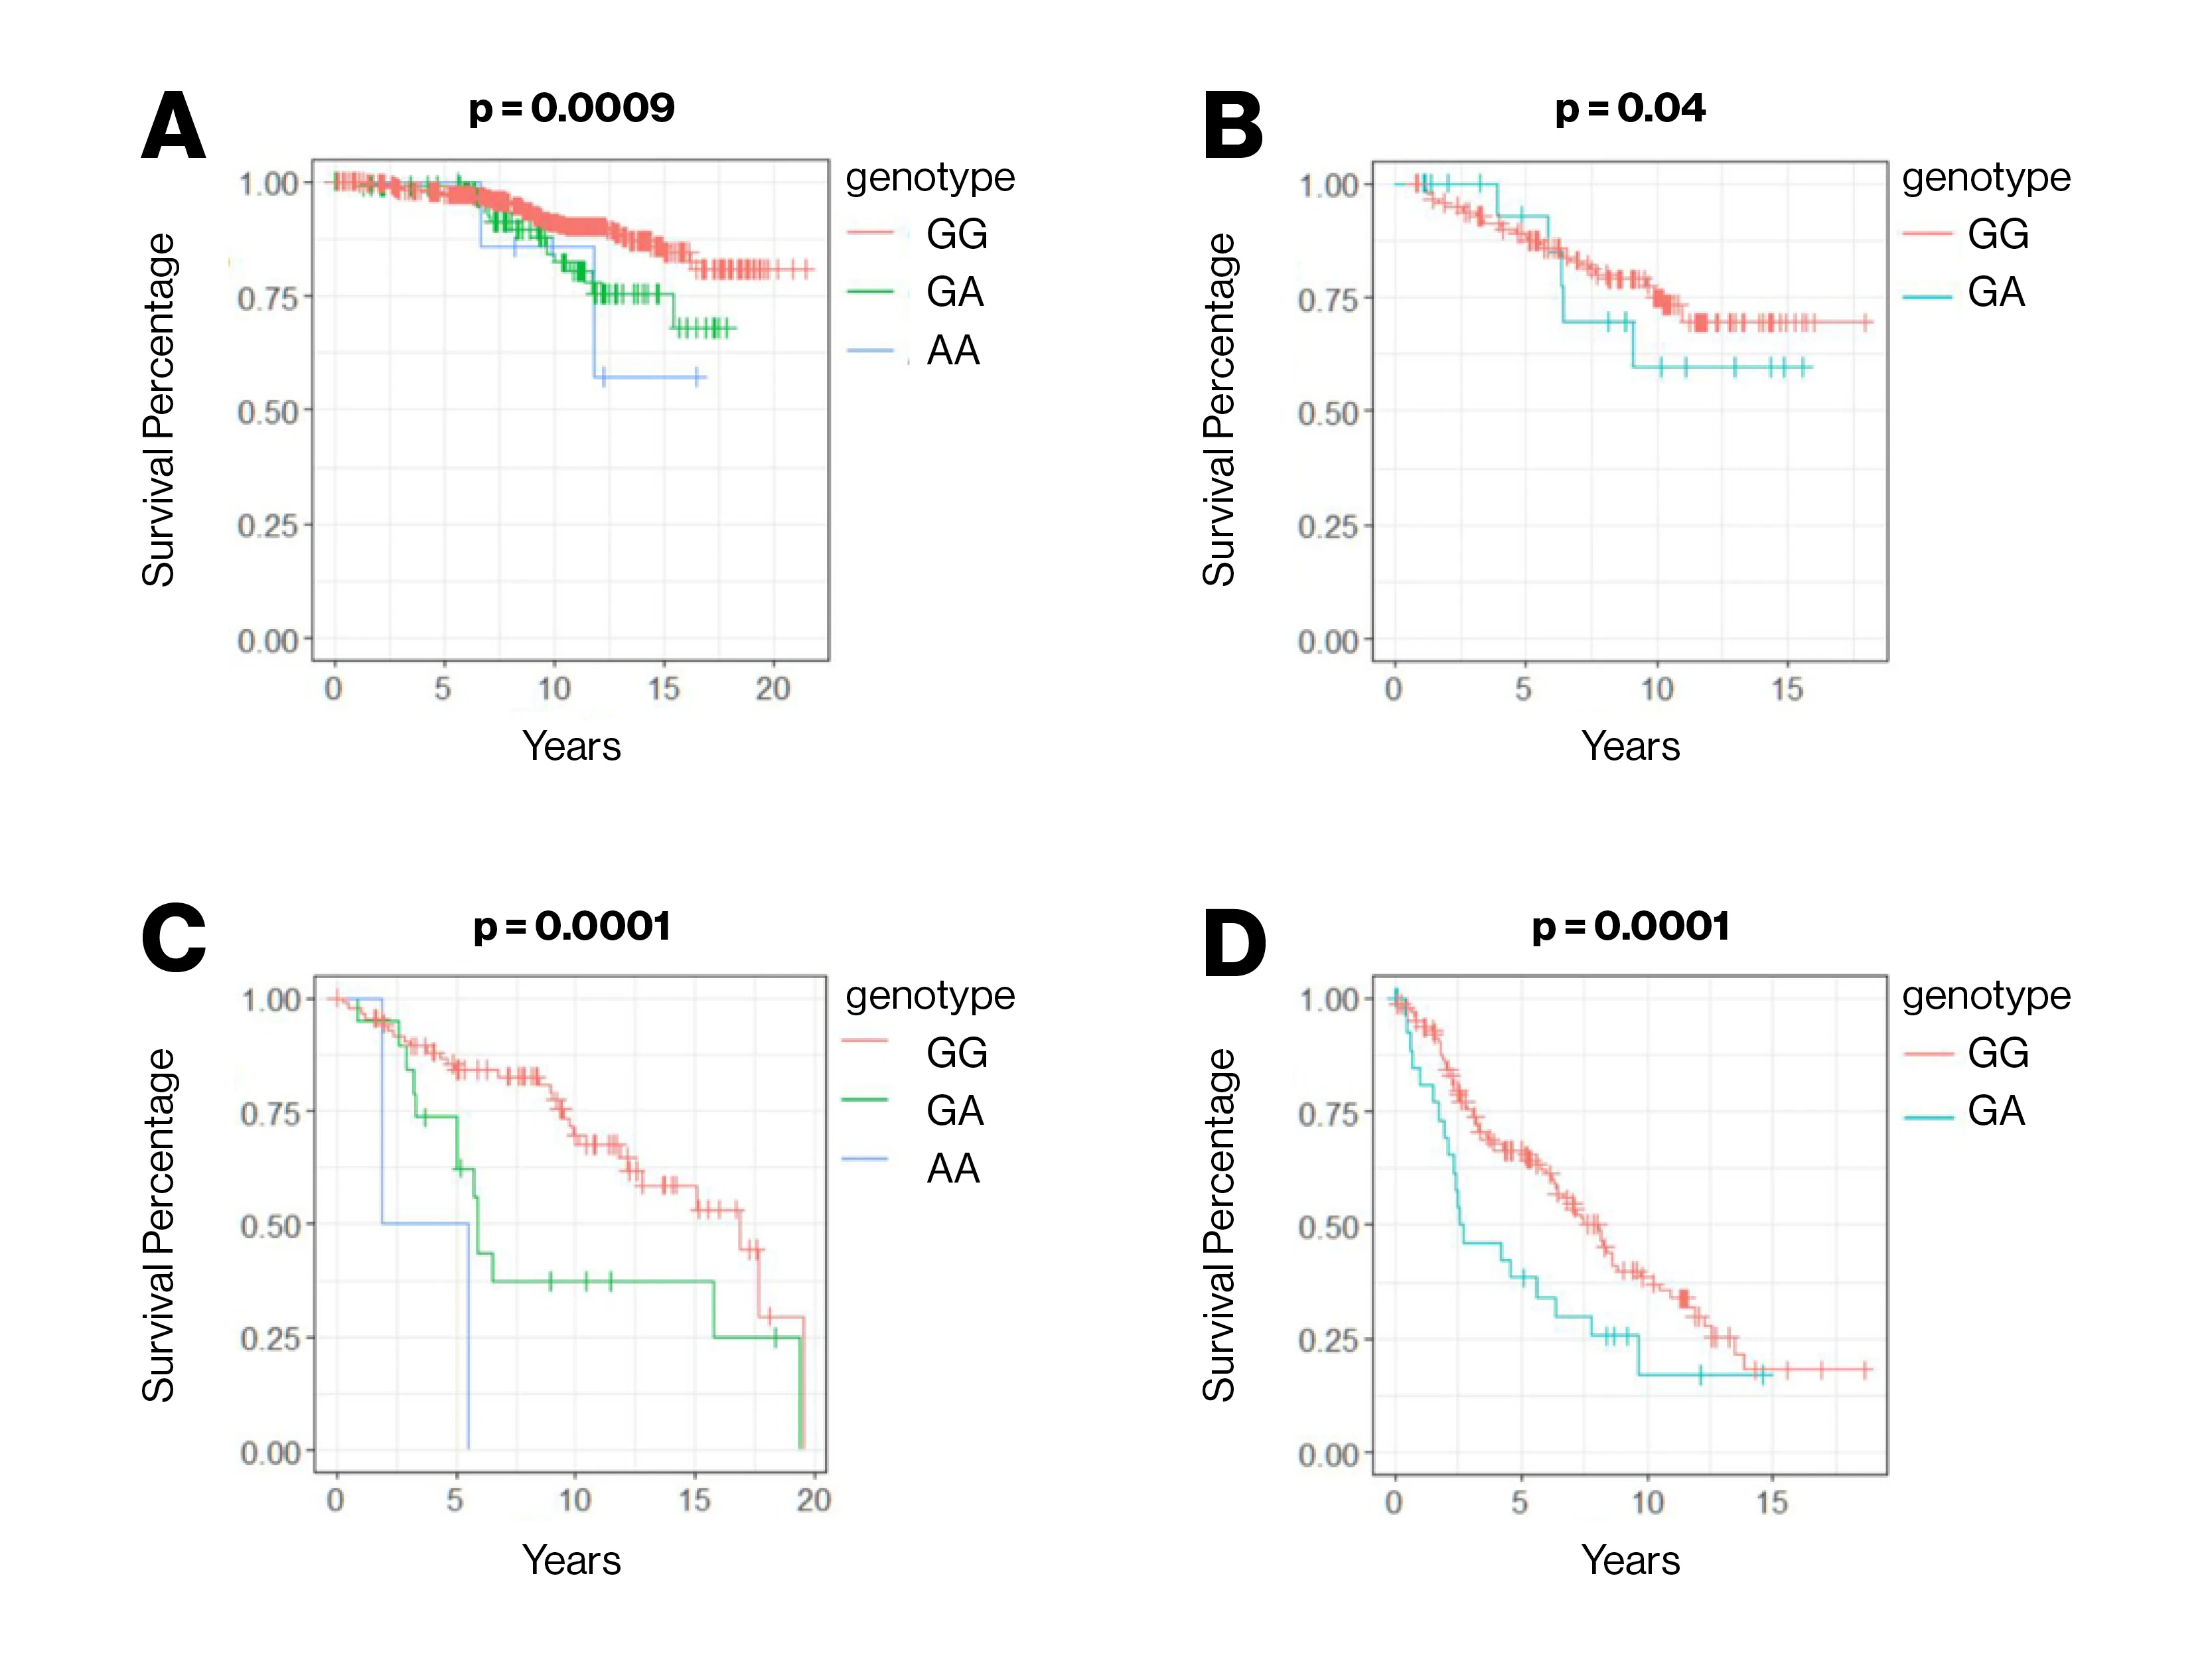 Overall survival from the time of prostate cancer diagnosis worsens with each additional copy of the “A” allele at the AOX1 gene. This observation holds in both aggressive (A,C) and non-aggressive (B,D) prostate cancer cases, as well as in cases diagnosed at both an advanced (C,D) and non-advanced (A,B) stage. 





   





